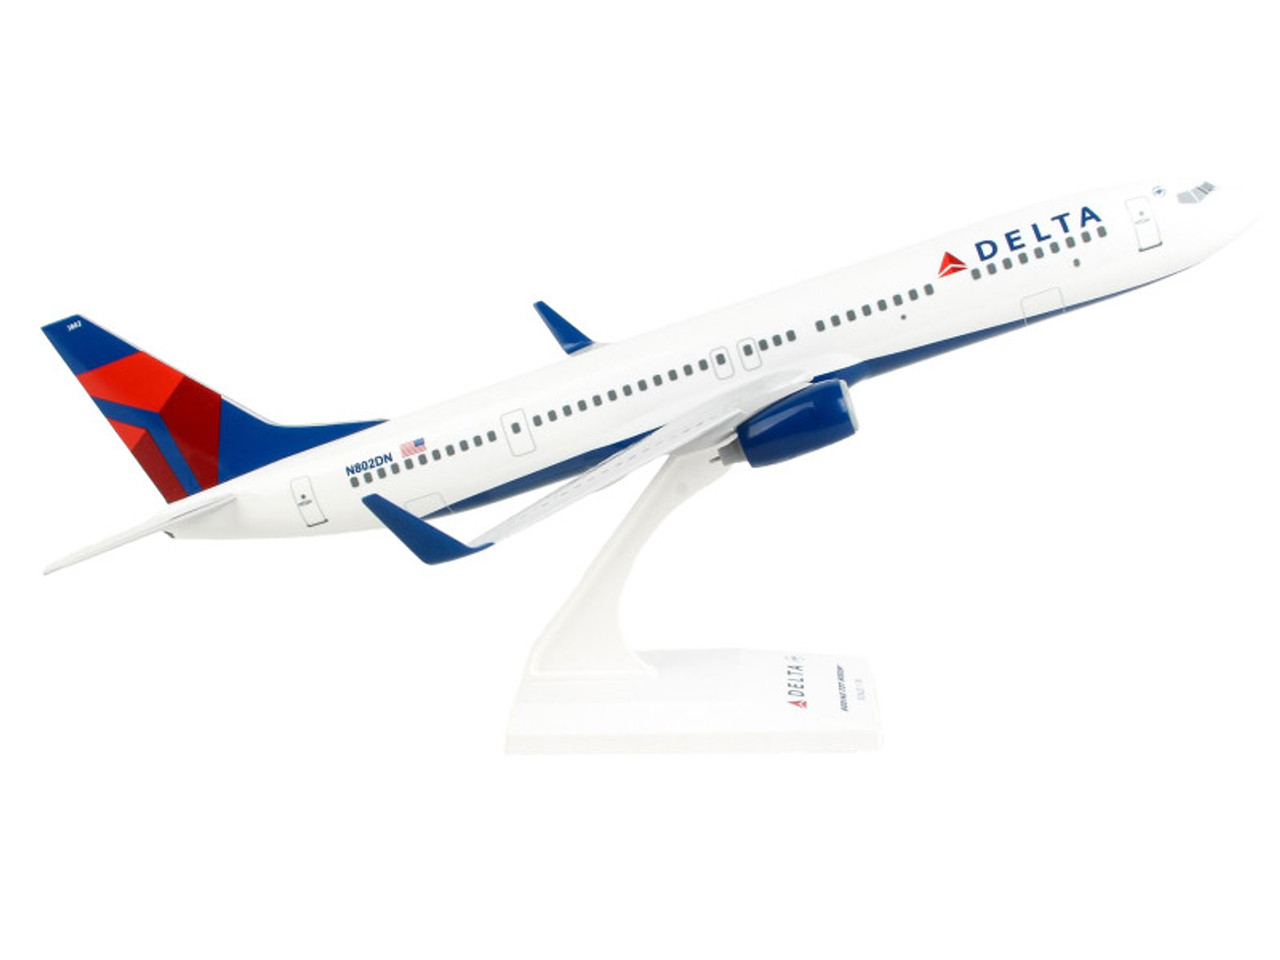 Boeing 737-900 Commercial Aircraft "Delta Air Lines" (N802DN) White with Blue and Red Tail (Snap-Fit) 1/130 Plastic Model by Skymarks